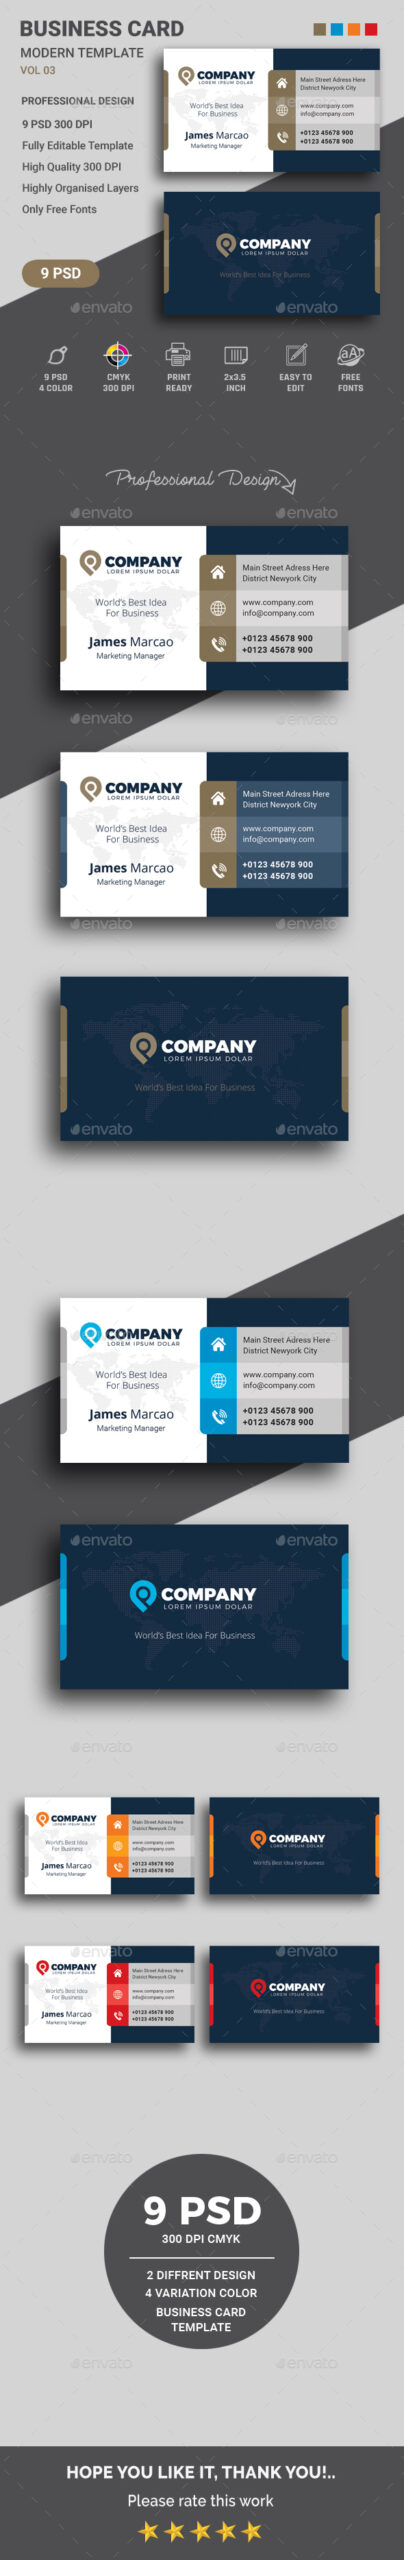 Business Card Templates & Designs From Graphicriver With Regard To Lawn Care Business Cards Templates Free